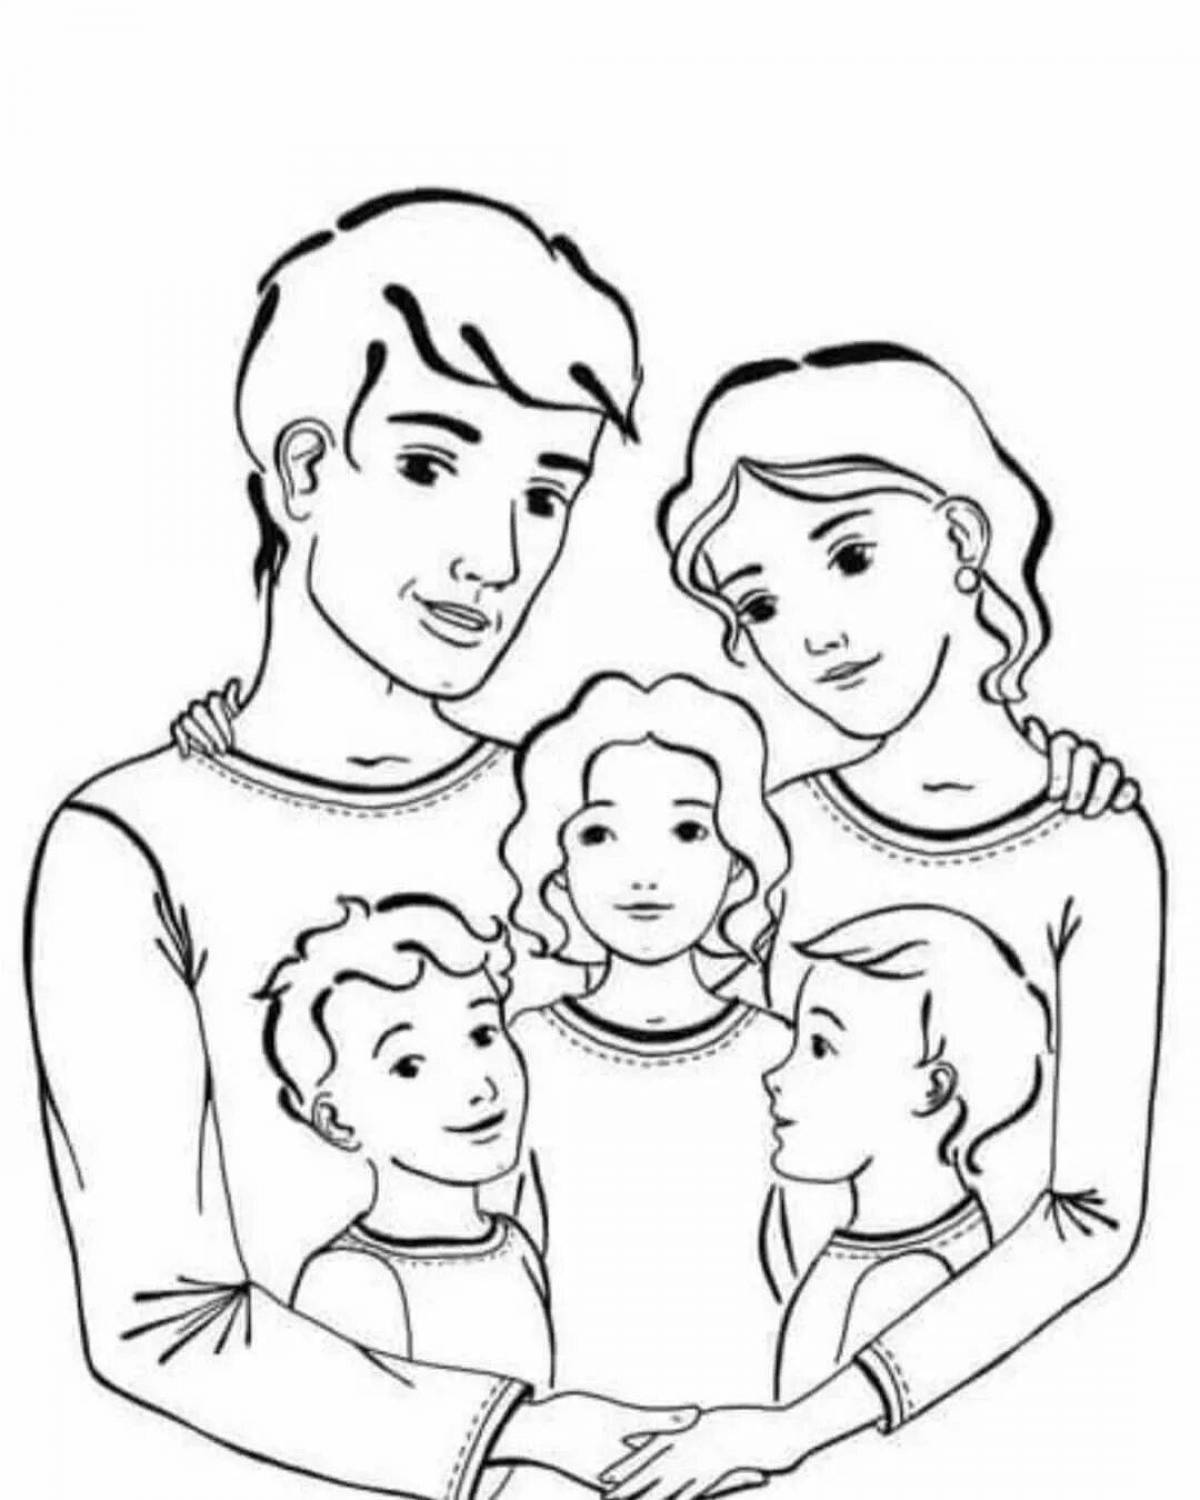 Fun coloring book for a family of 5